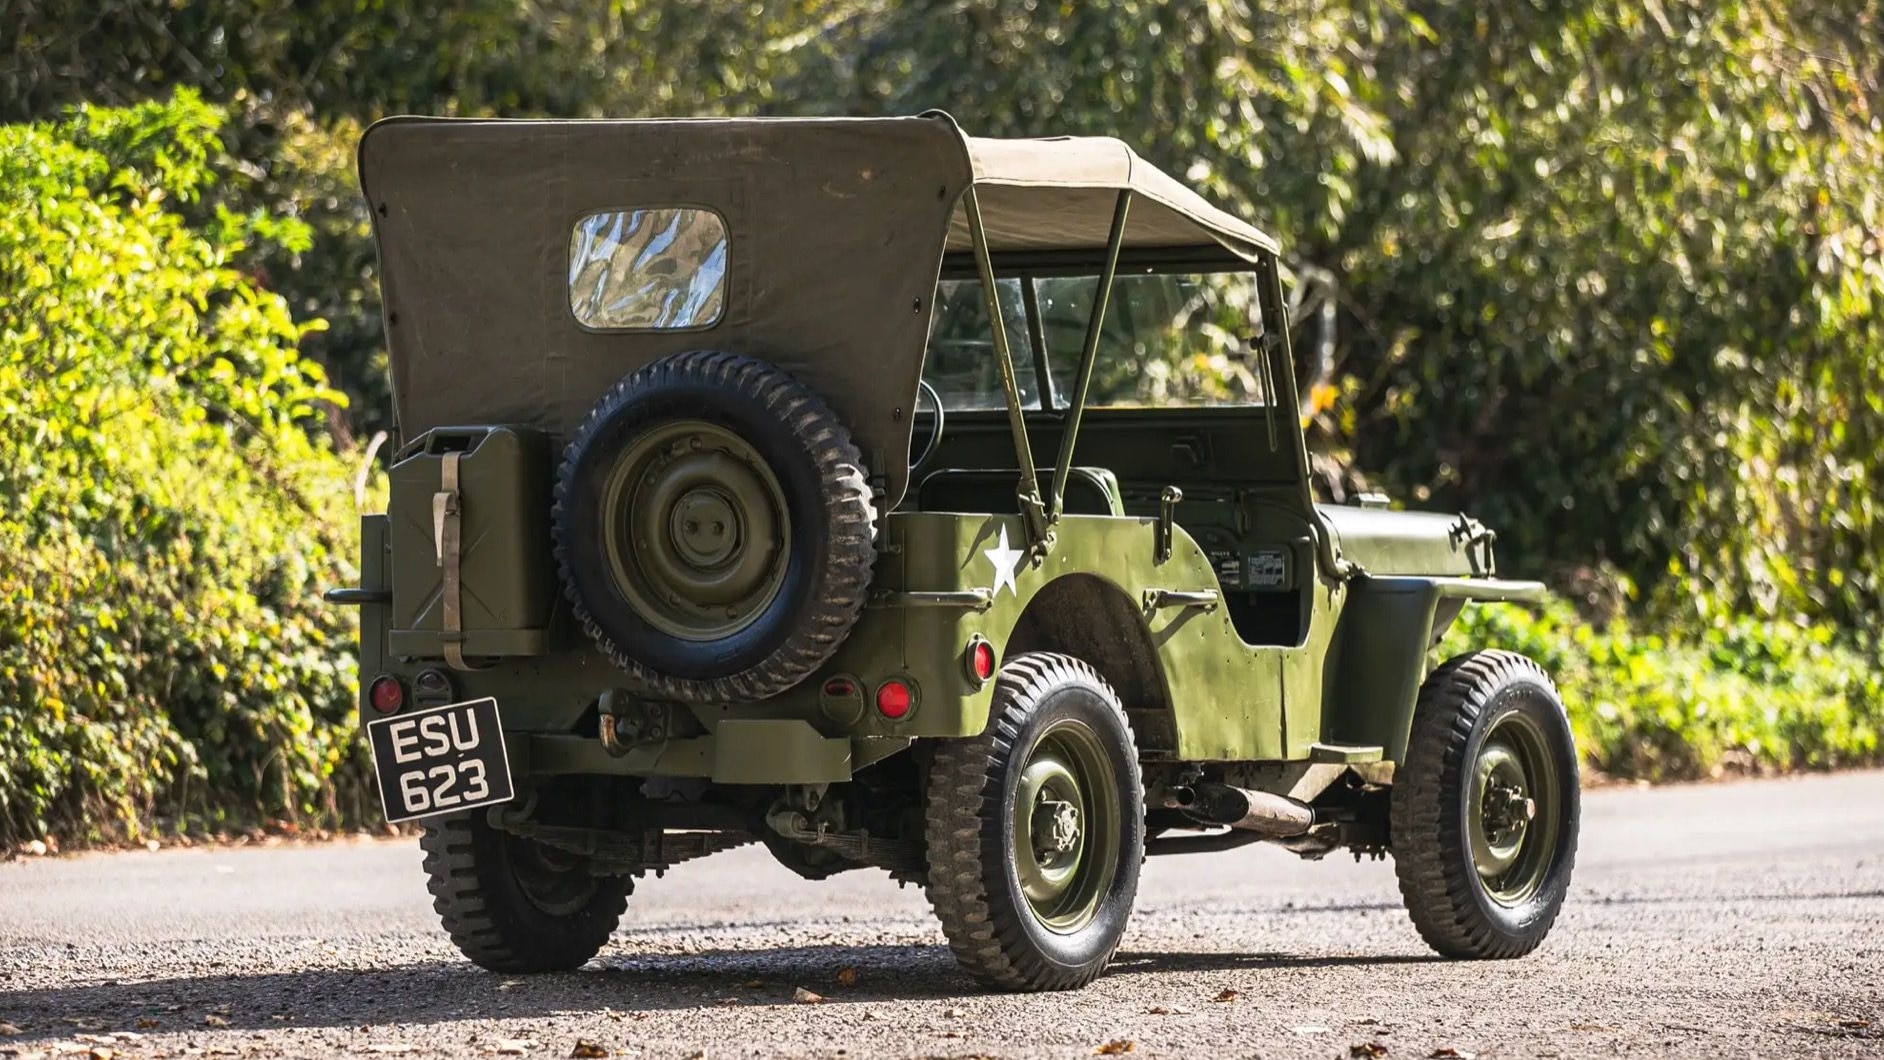 1944 Willys Jeep from "Saving Private Ryan" (photo via Iconic Auctioneers)